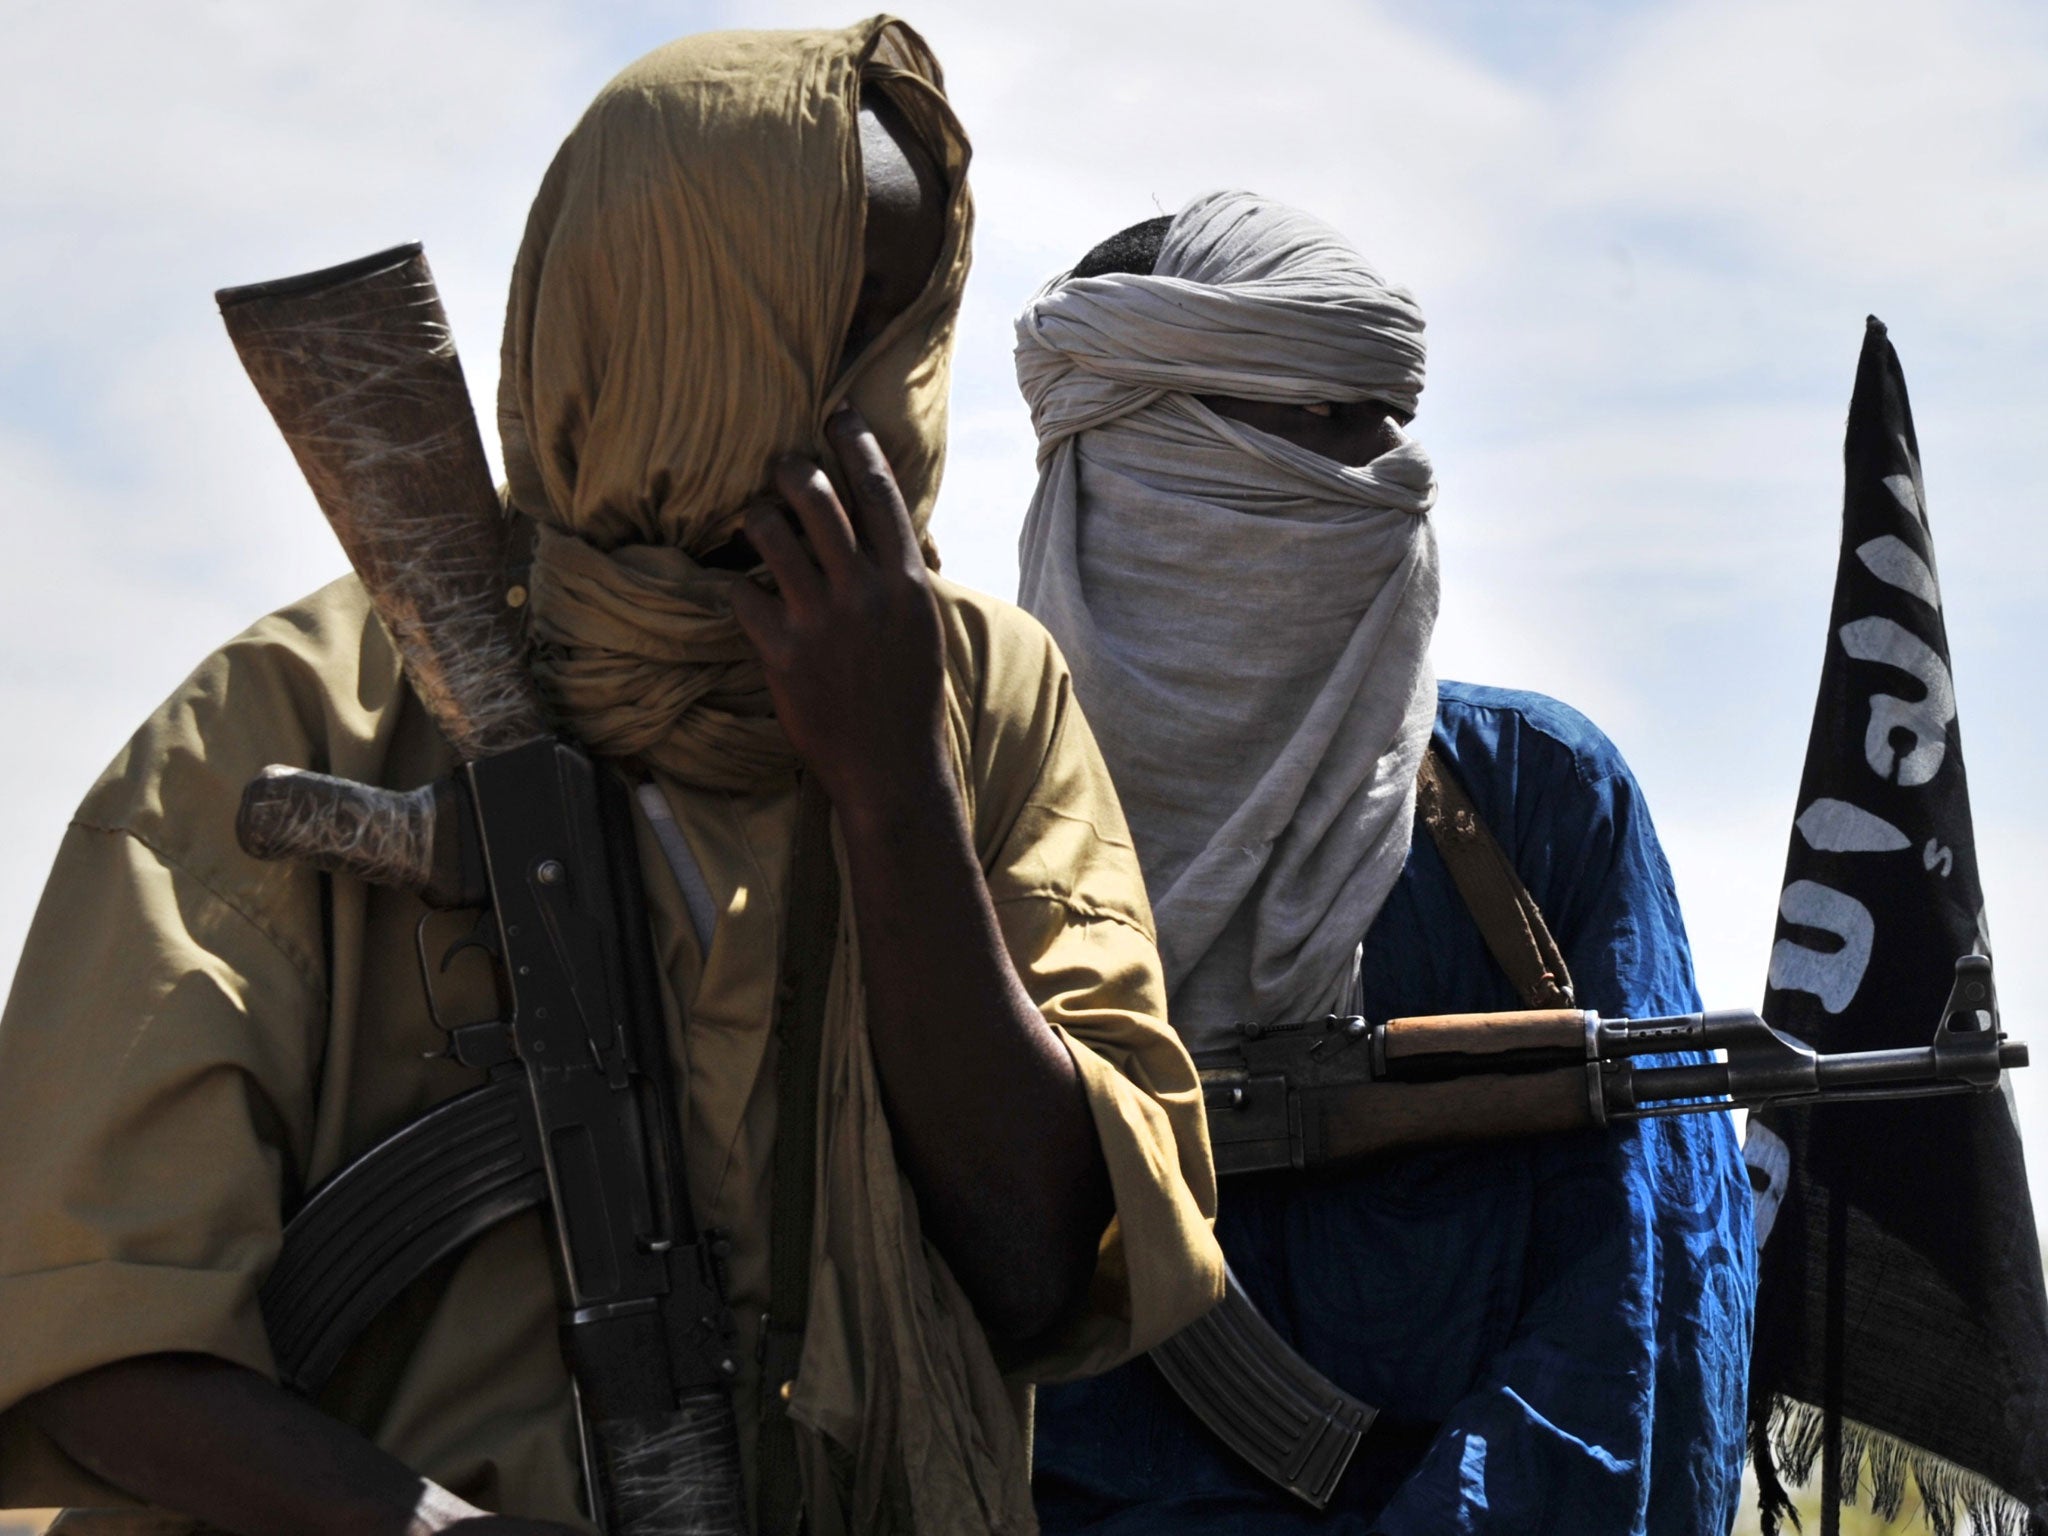 Islamist police have been imposing their version of Islam across northern Mali